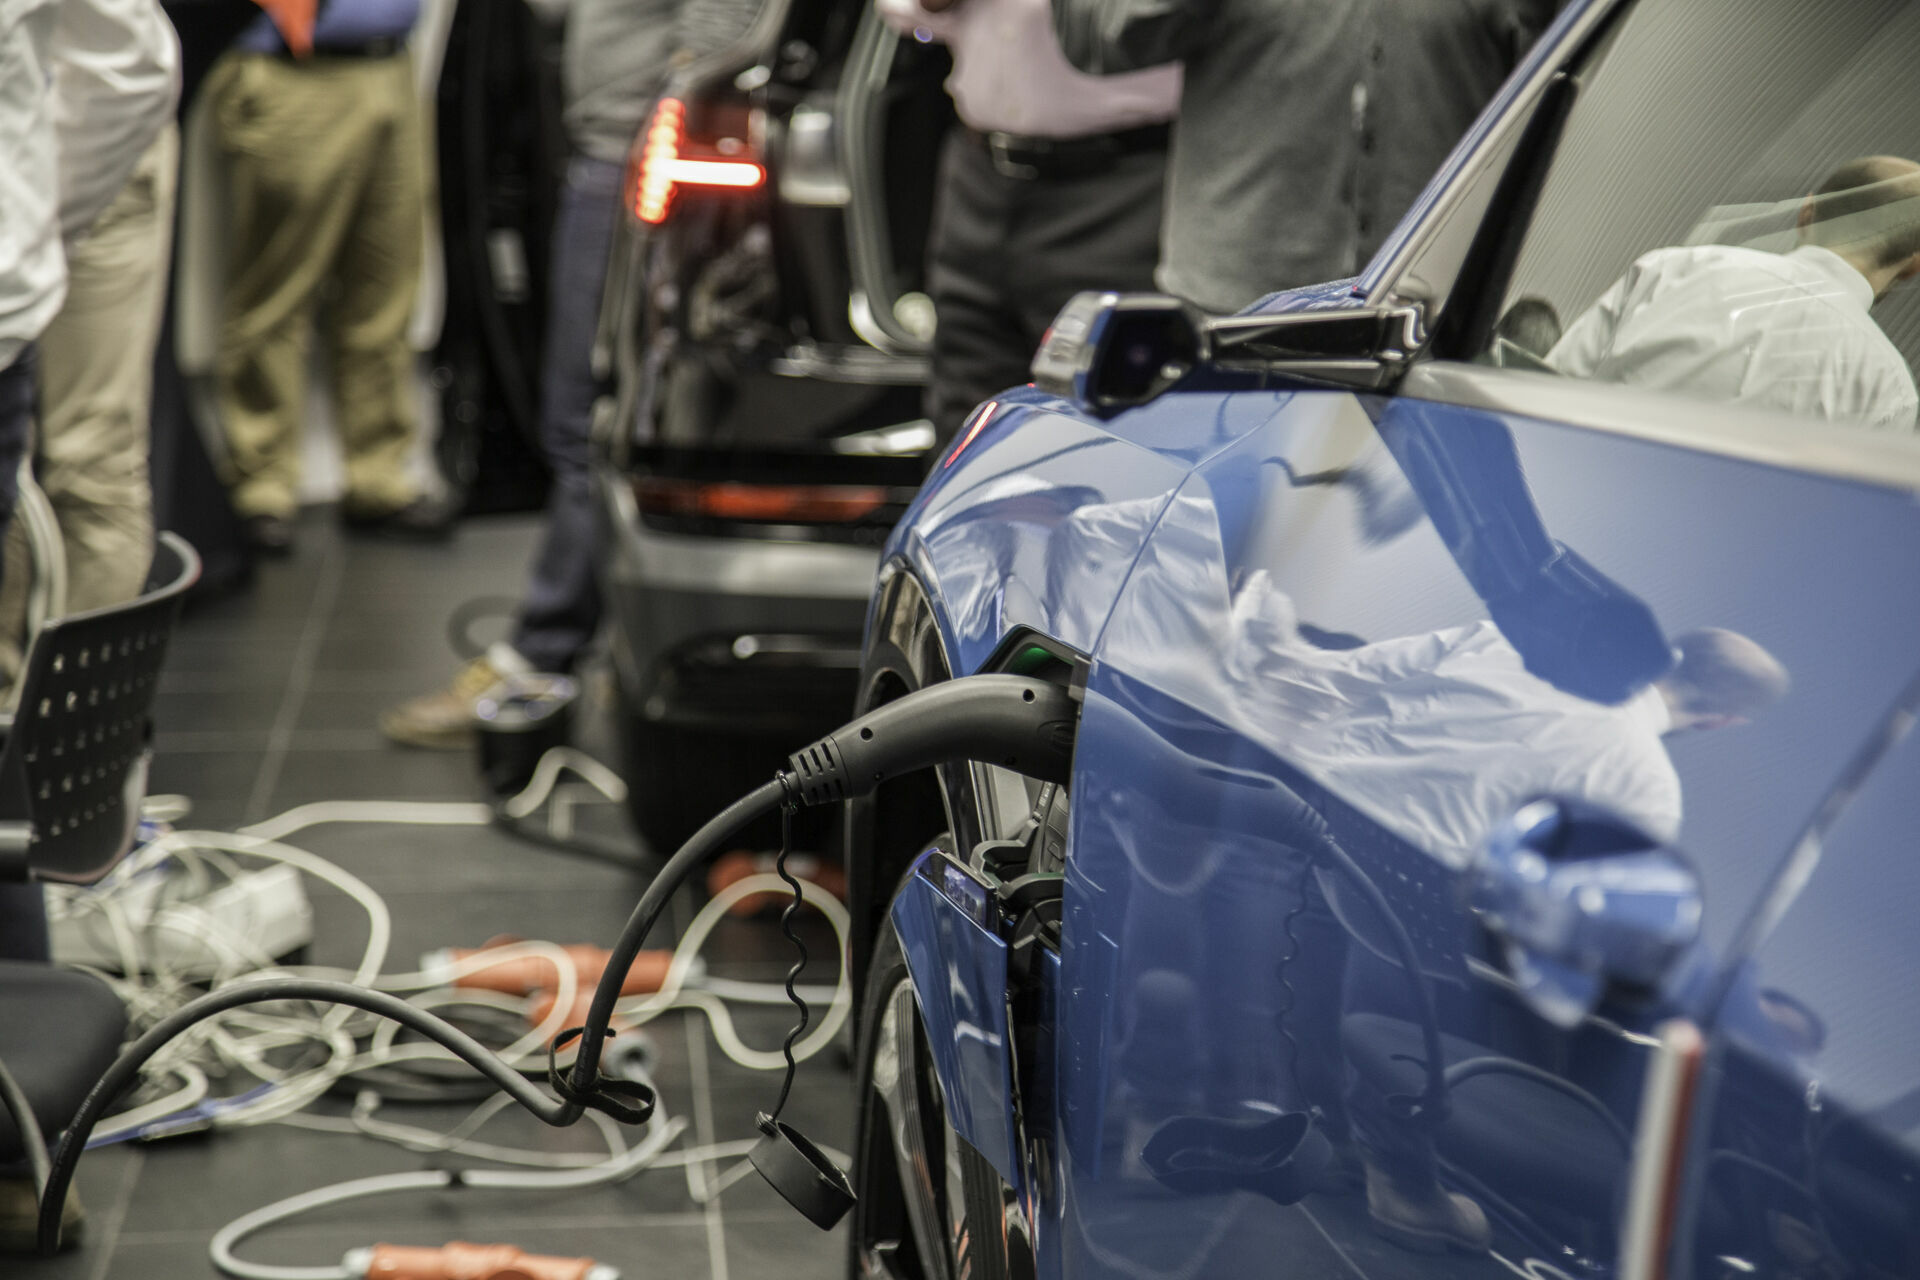 “Plugfest E-Mobility” at Audi Brussels